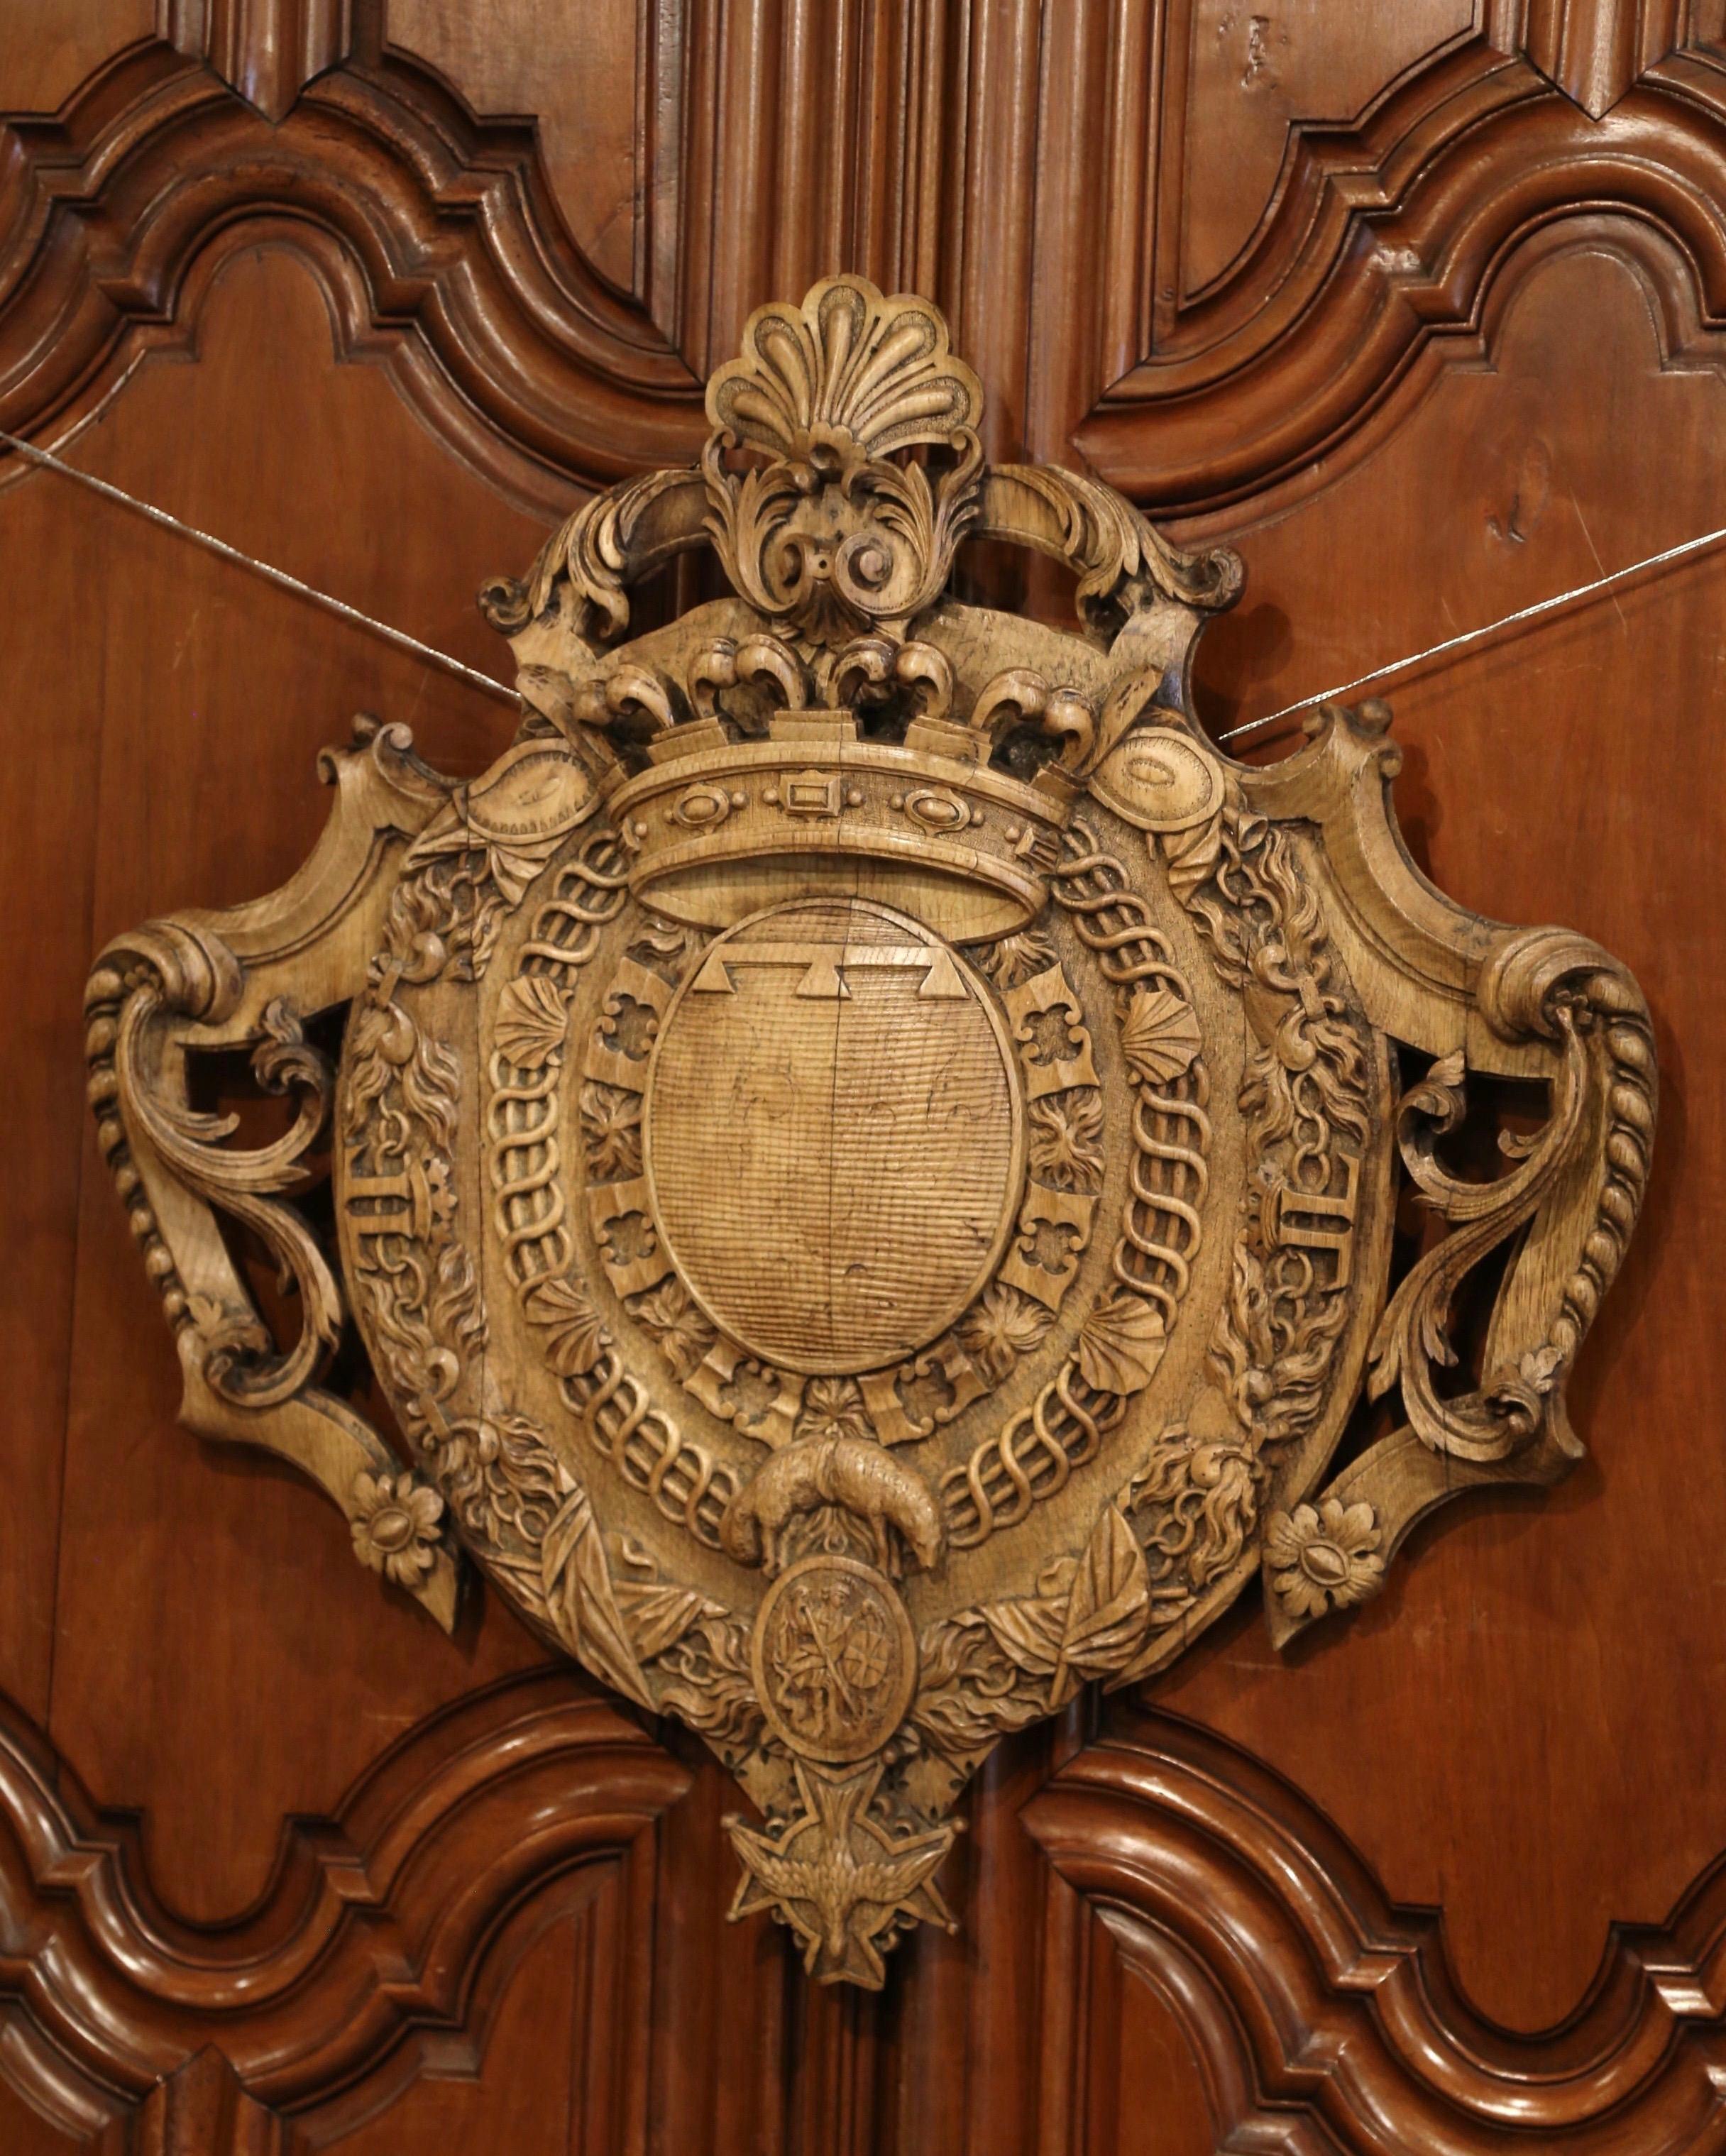 This beautiful, antique crest was crafted in southwest France, circa 1850. The large coat of arms is heavily carved with a shell motif cartouche at the pediment supporting a crown. Both sides feature intricate carvings including scroll decor with